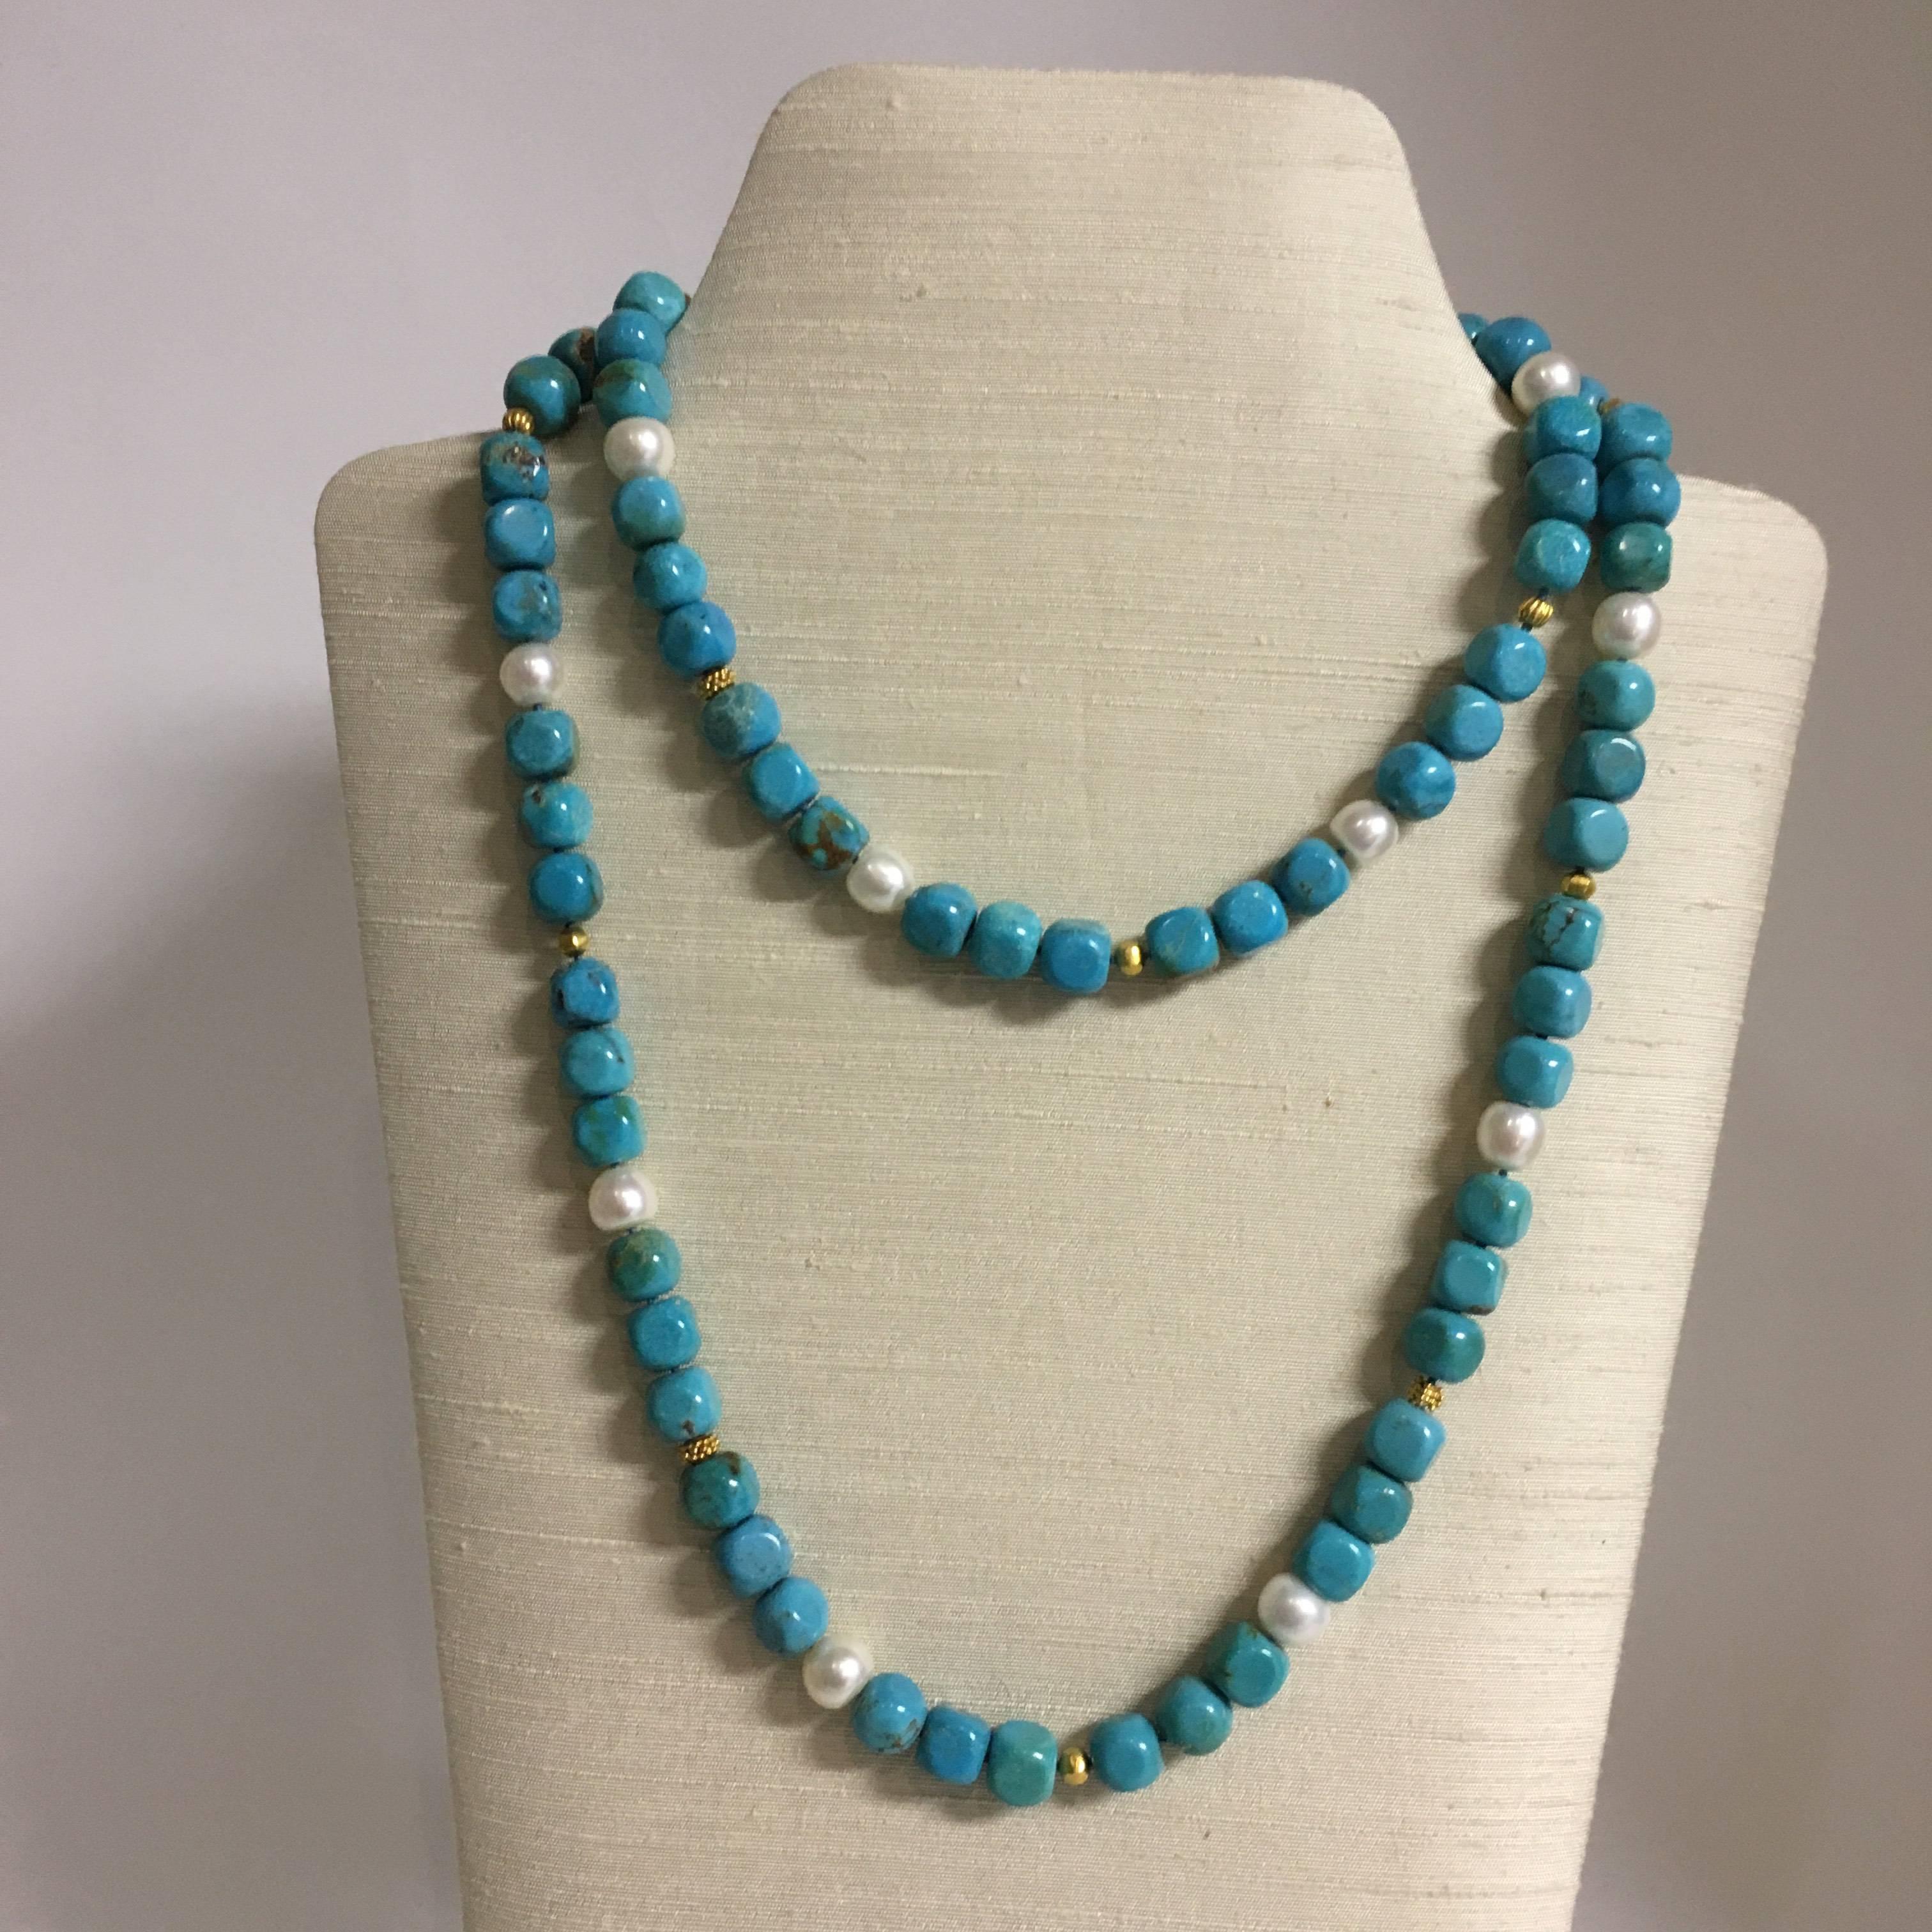 The long necklace 42” L (106cm L)  with slightly squarish round Tibetan turquoise beads is beautifully accented by freshwater pearls, 18K gold beads and S-hook clasp. It can be worn long as a single strand or doubled up and shorter.